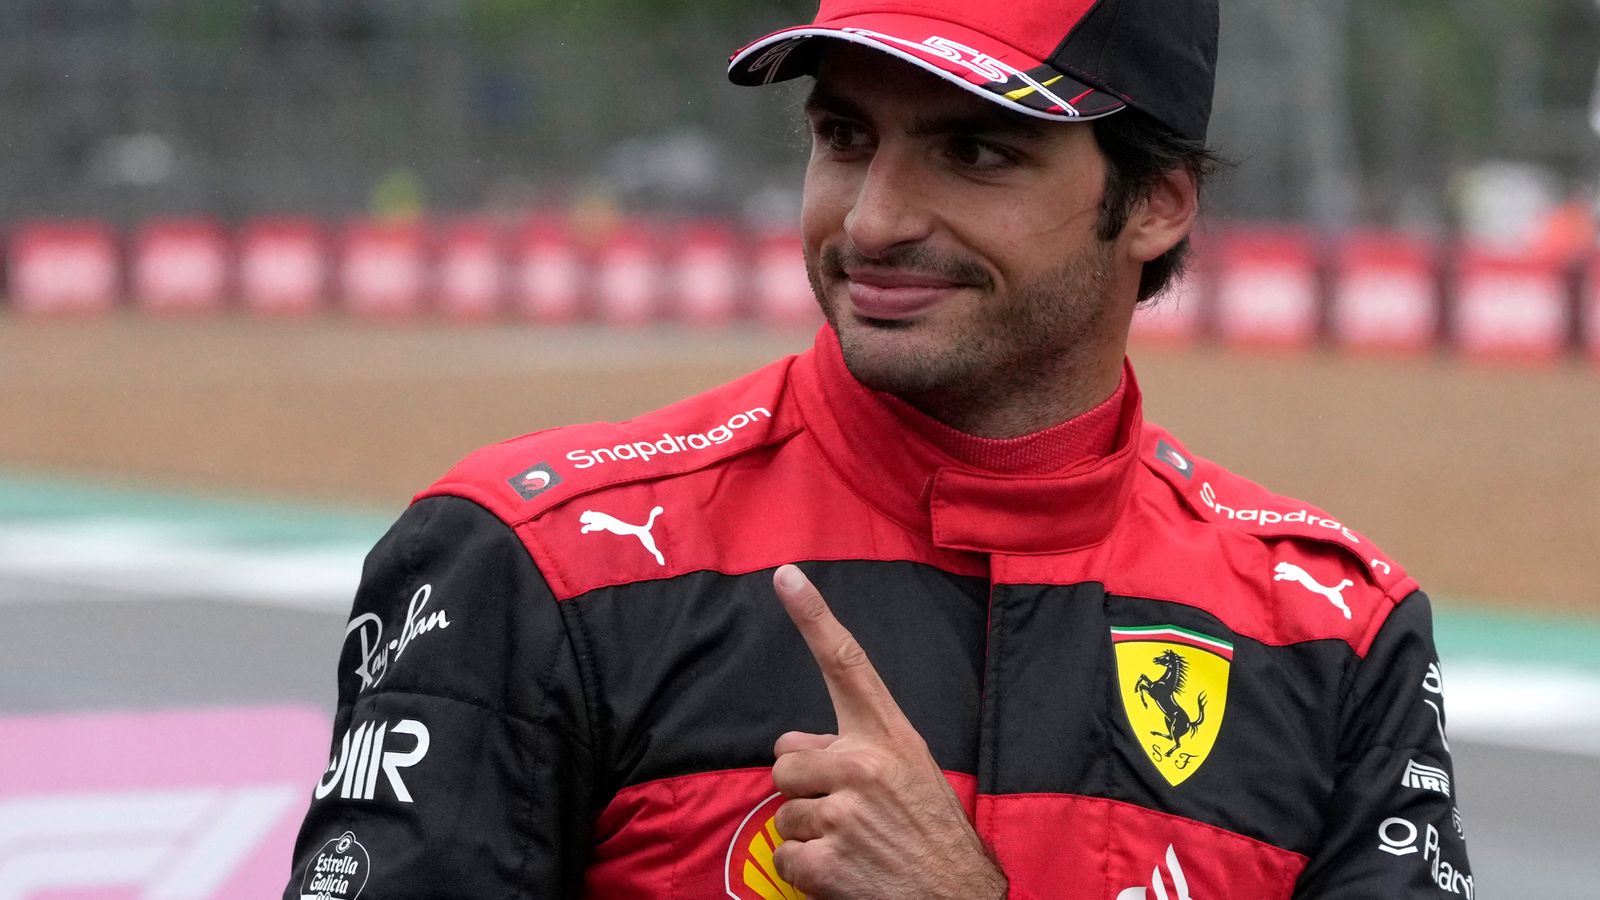 British GP: Carlos Sainz thought maiden pole lap was ‘nothing special’ but targets Ferrari win at Silverstone